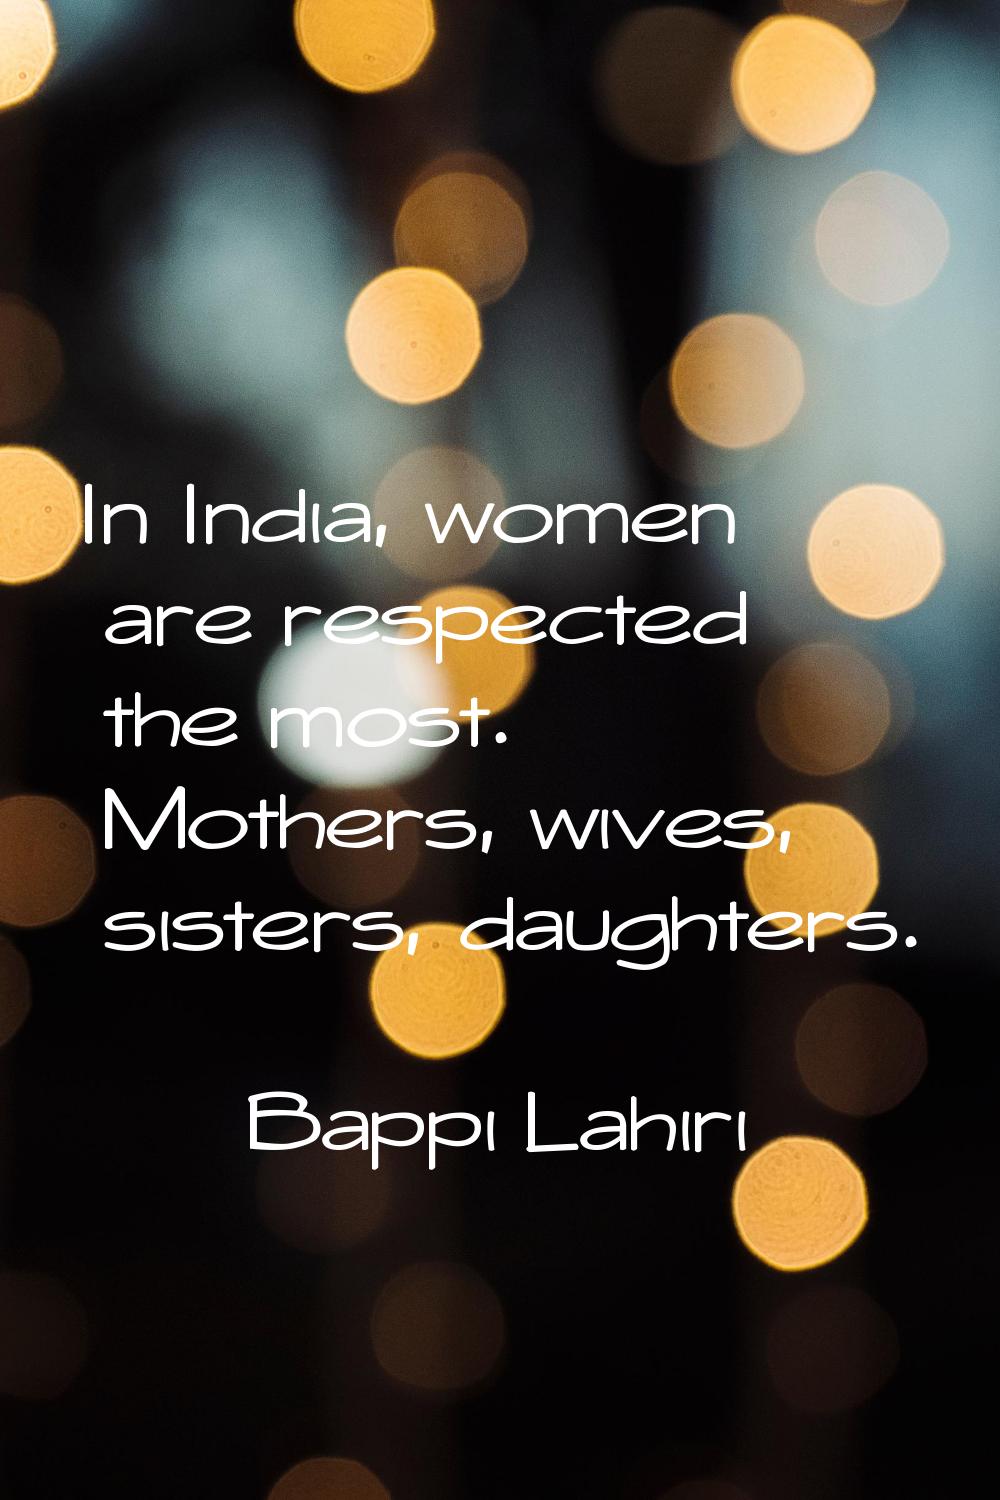 In India, women are respected the most. Mothers, wives, sisters, daughters.